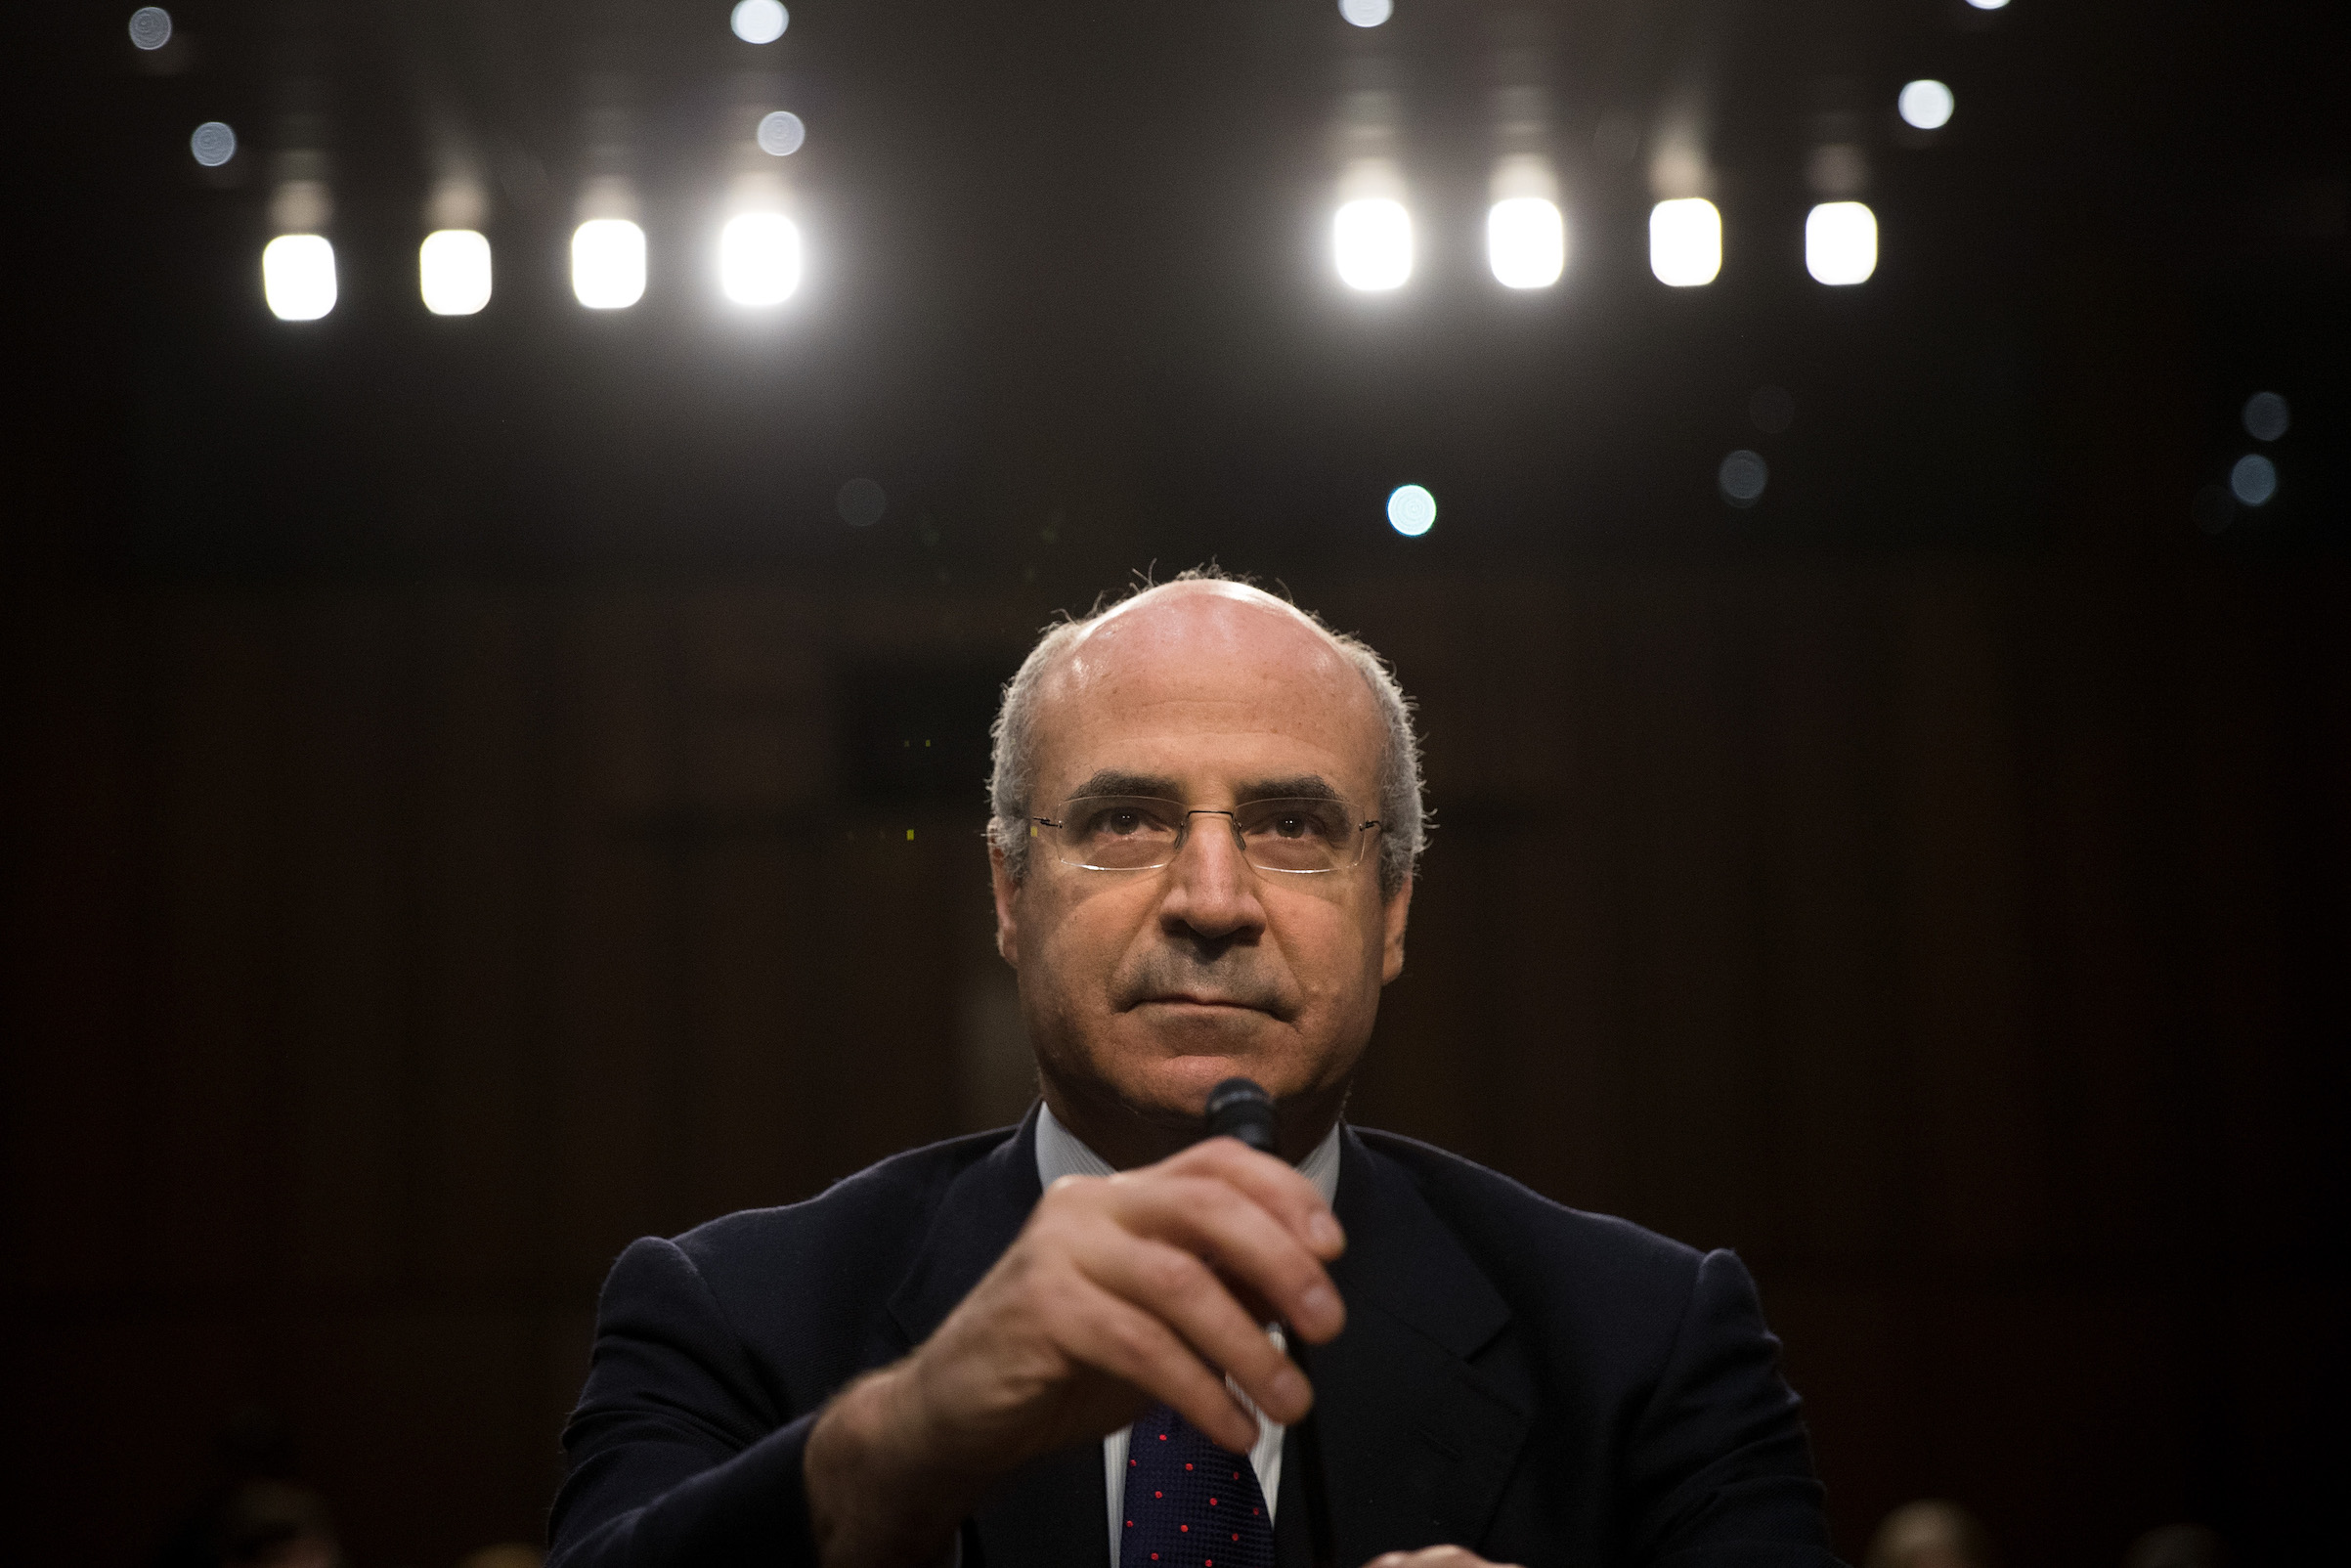 William Browder, chief executive officer of Hermitage Capital Management, takes his seat as he arrives for a Senate Judiciary Committee hearing titled 'Oversight of the Foreign Agents Registration Act and Attempts to Influence U.S. Elections' on July 27, 2017 in Washington, D.C. (Drew Angerer&mdash;Getty Images)